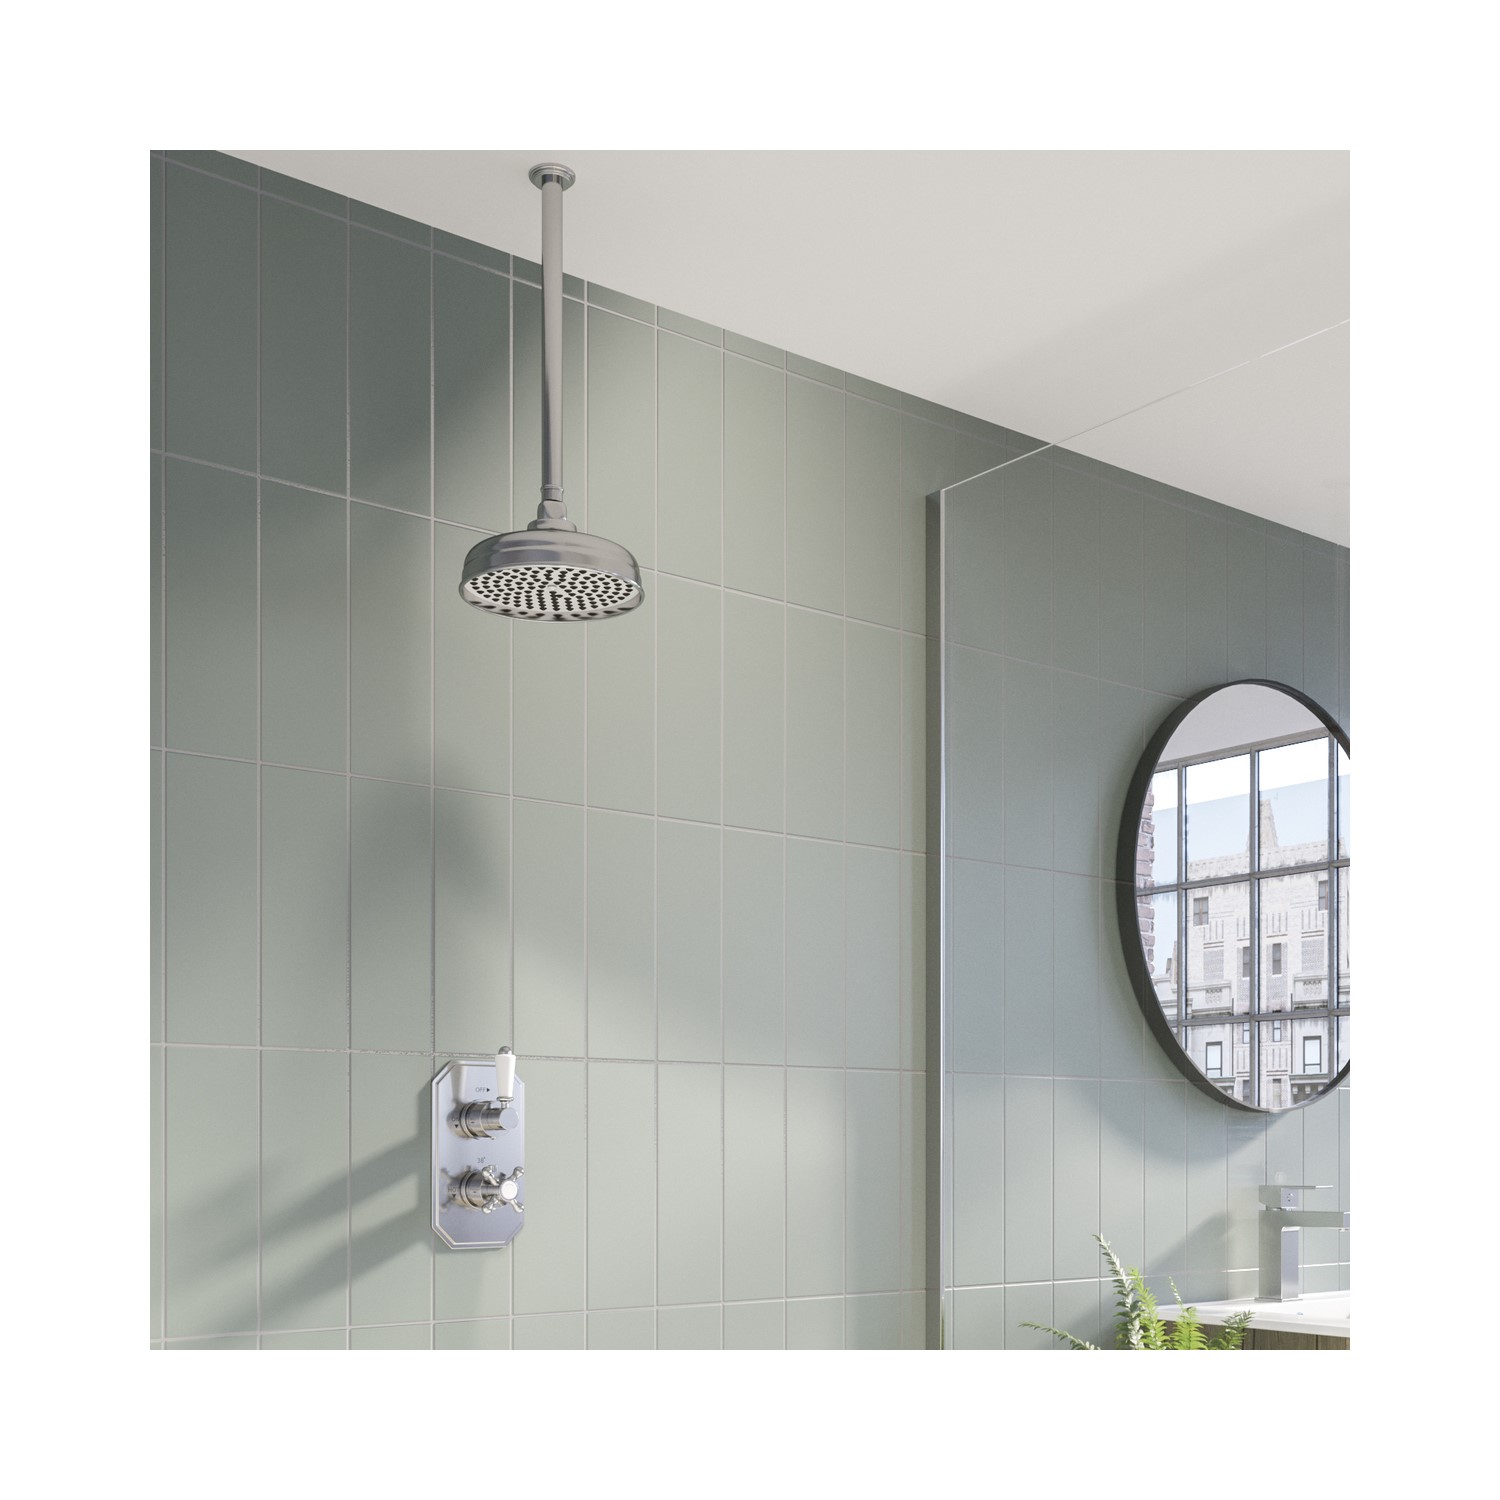 Traditional Concealed Thermostatic Mixer Shower with Ceiling Rainfall Head - Cambridge